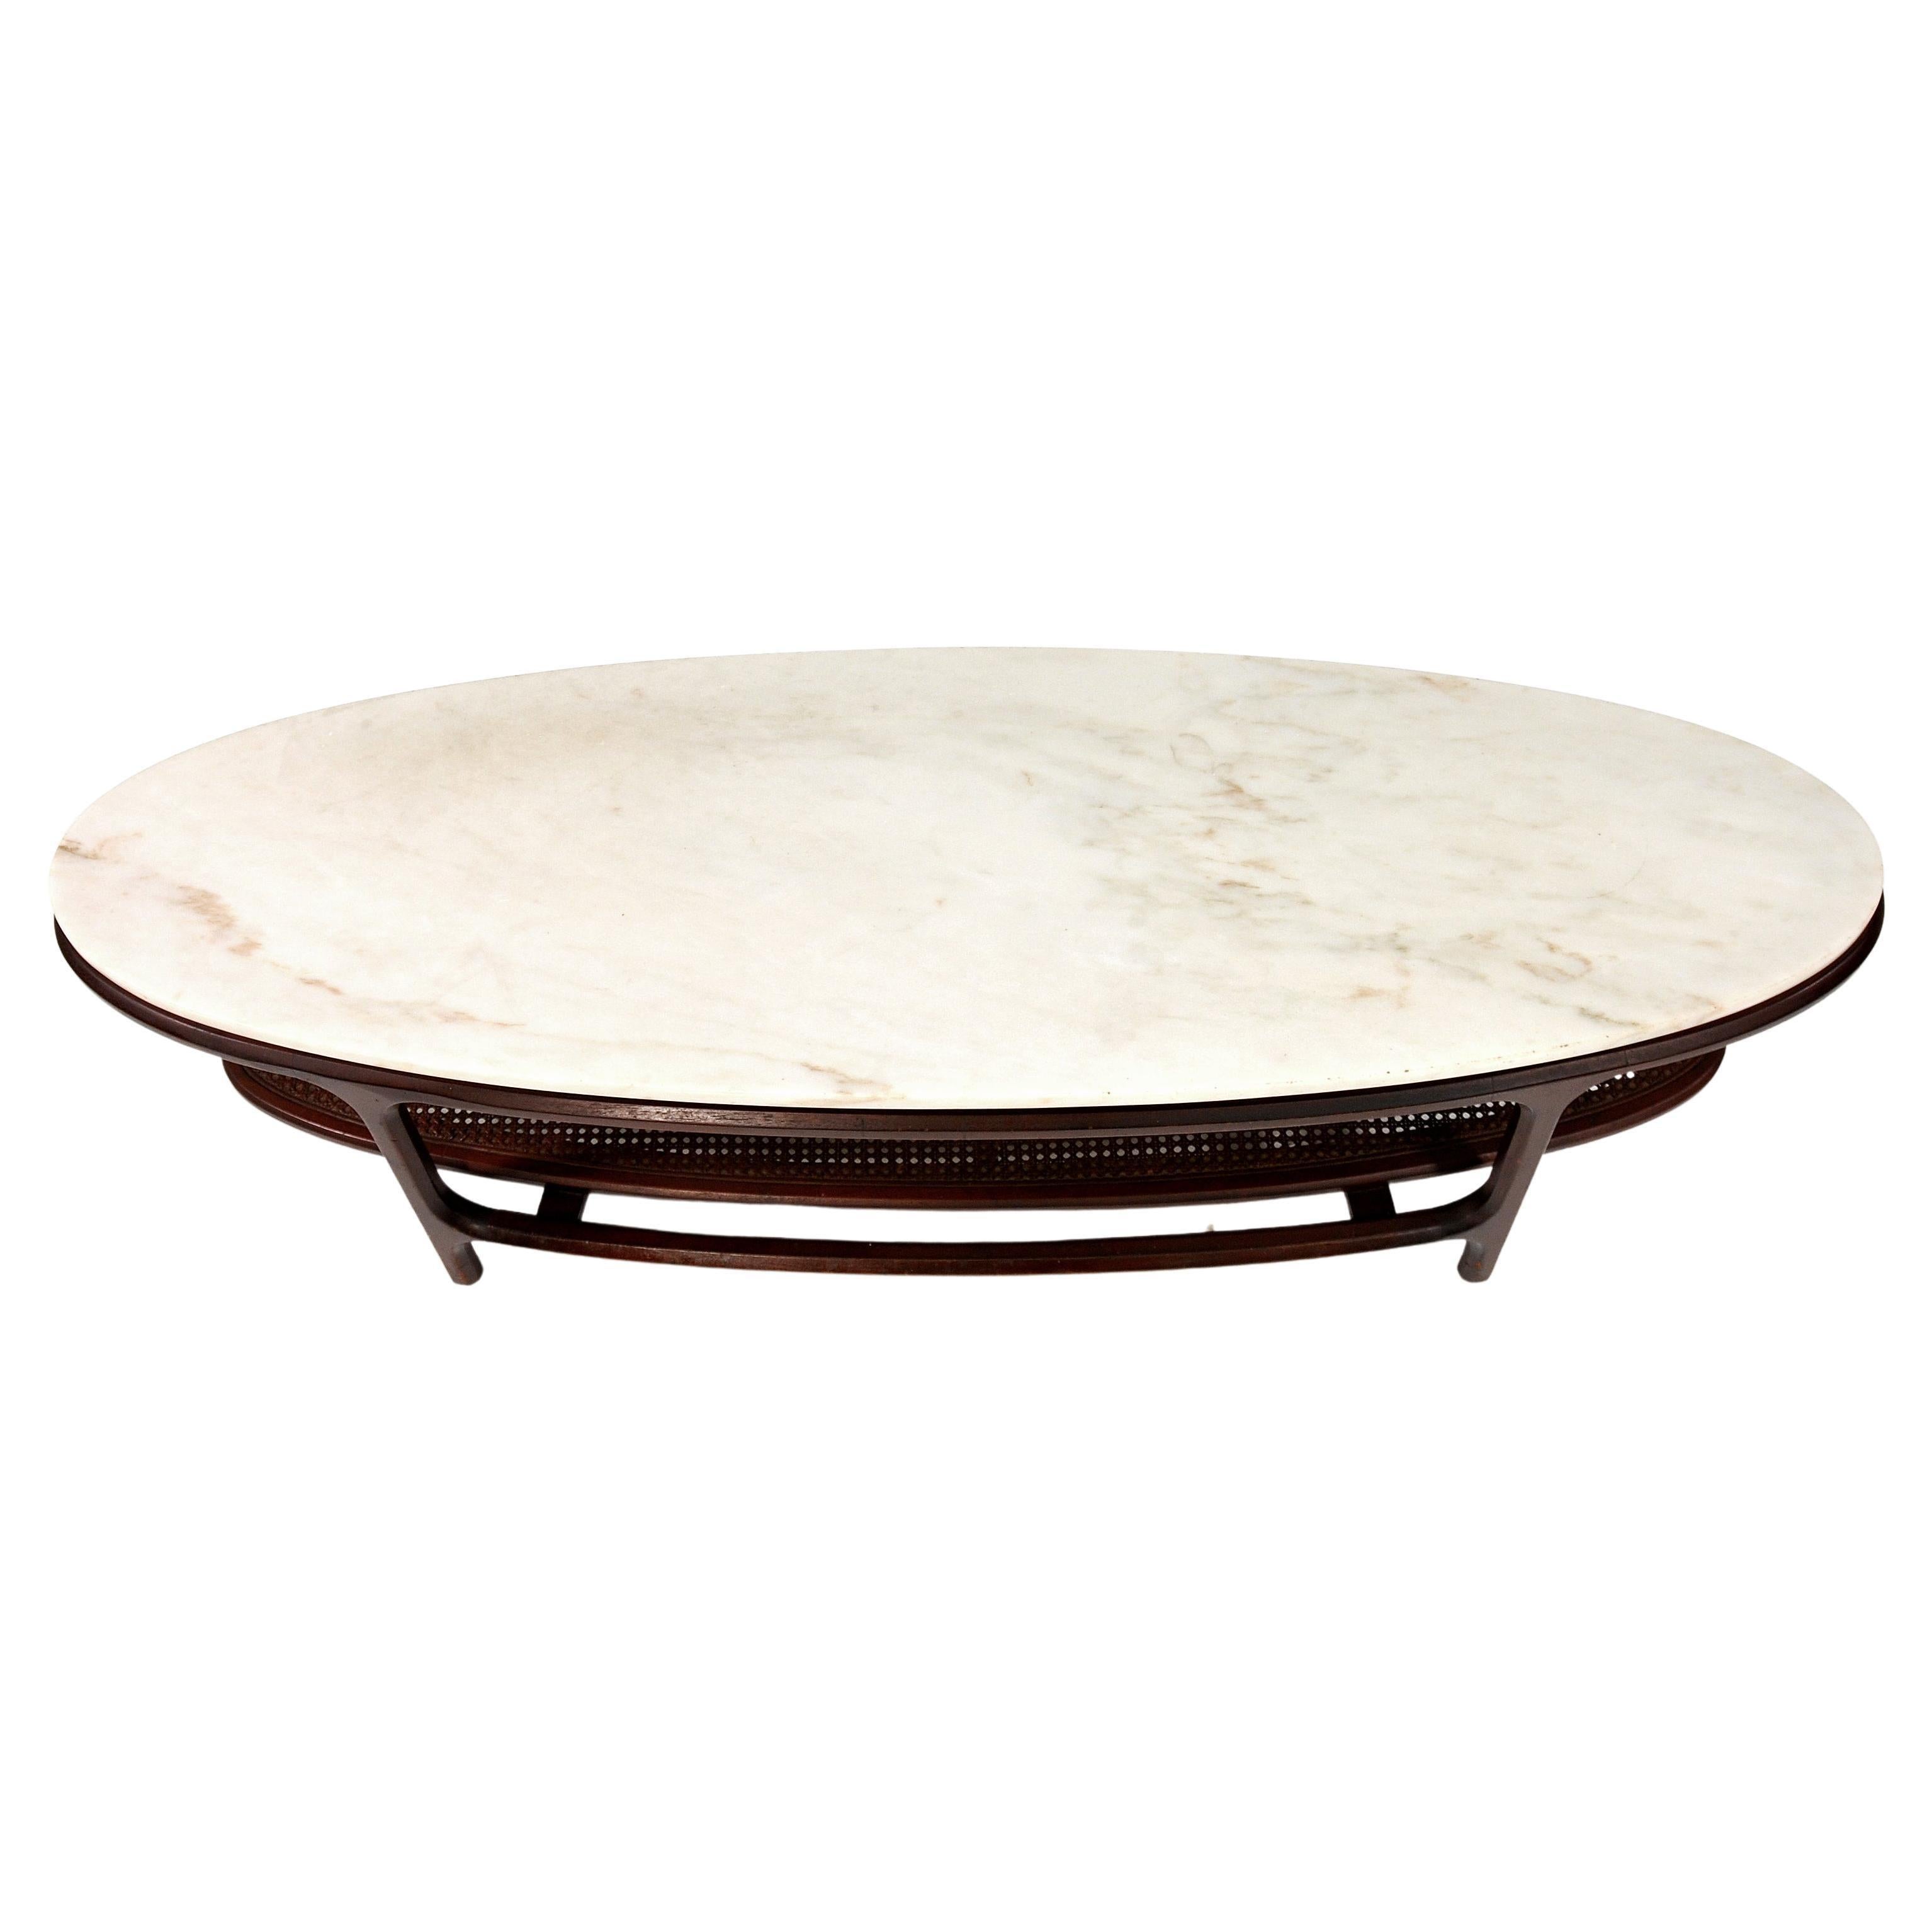 Mid-Century Modern Mid-Century White Marble, Walnut and Cane Surfboard Coffee Table